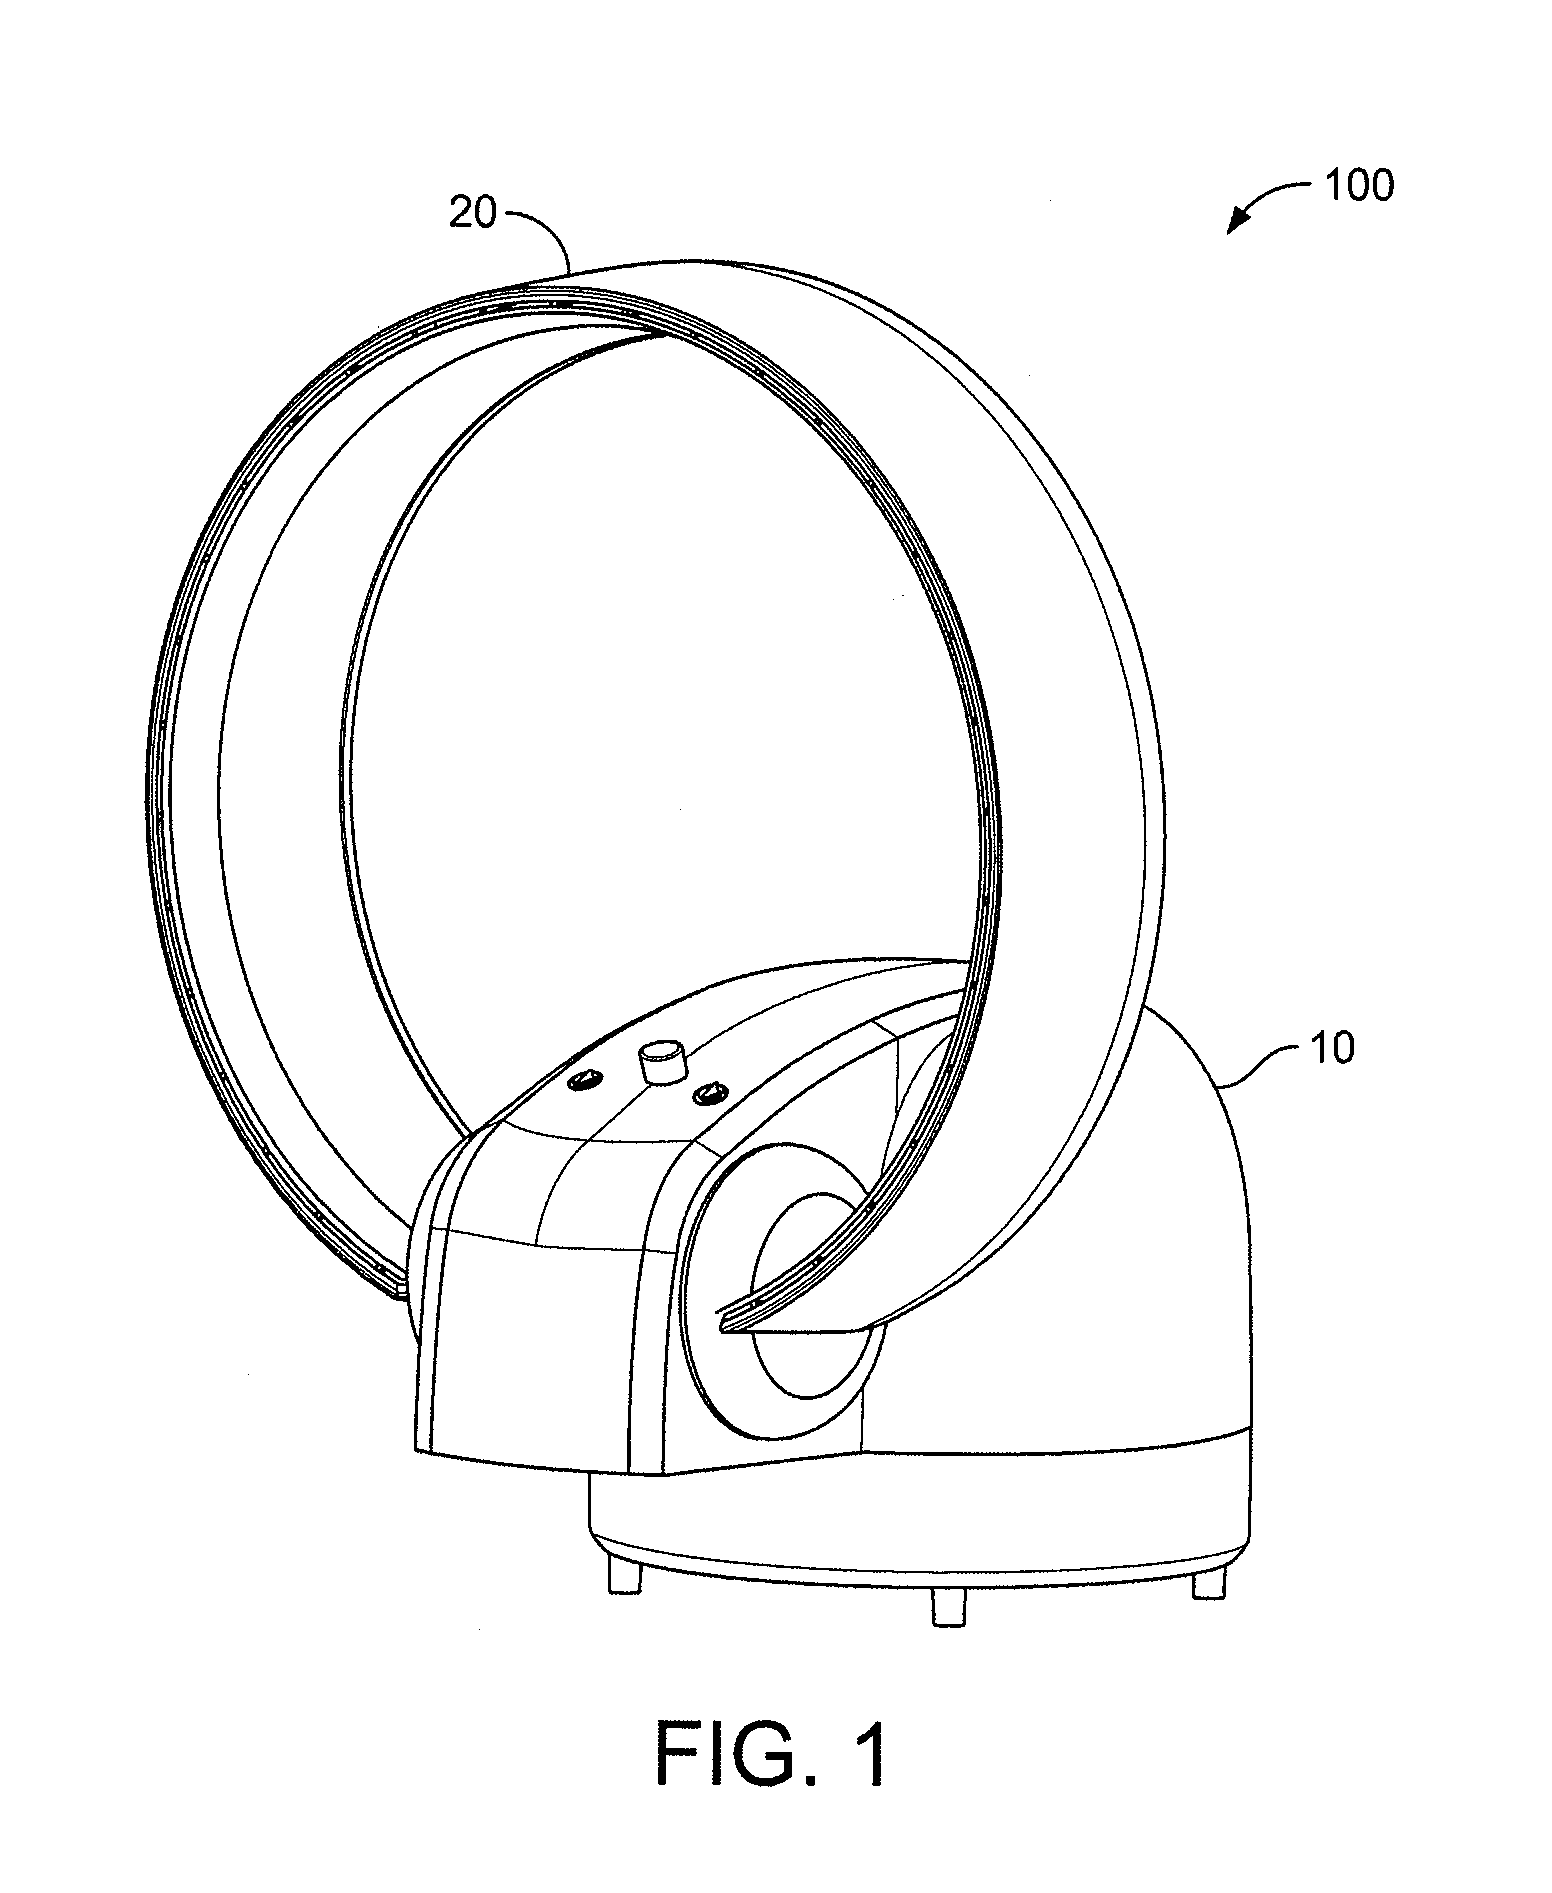 Device for blowing air by means of narrow slit nozzle assembly